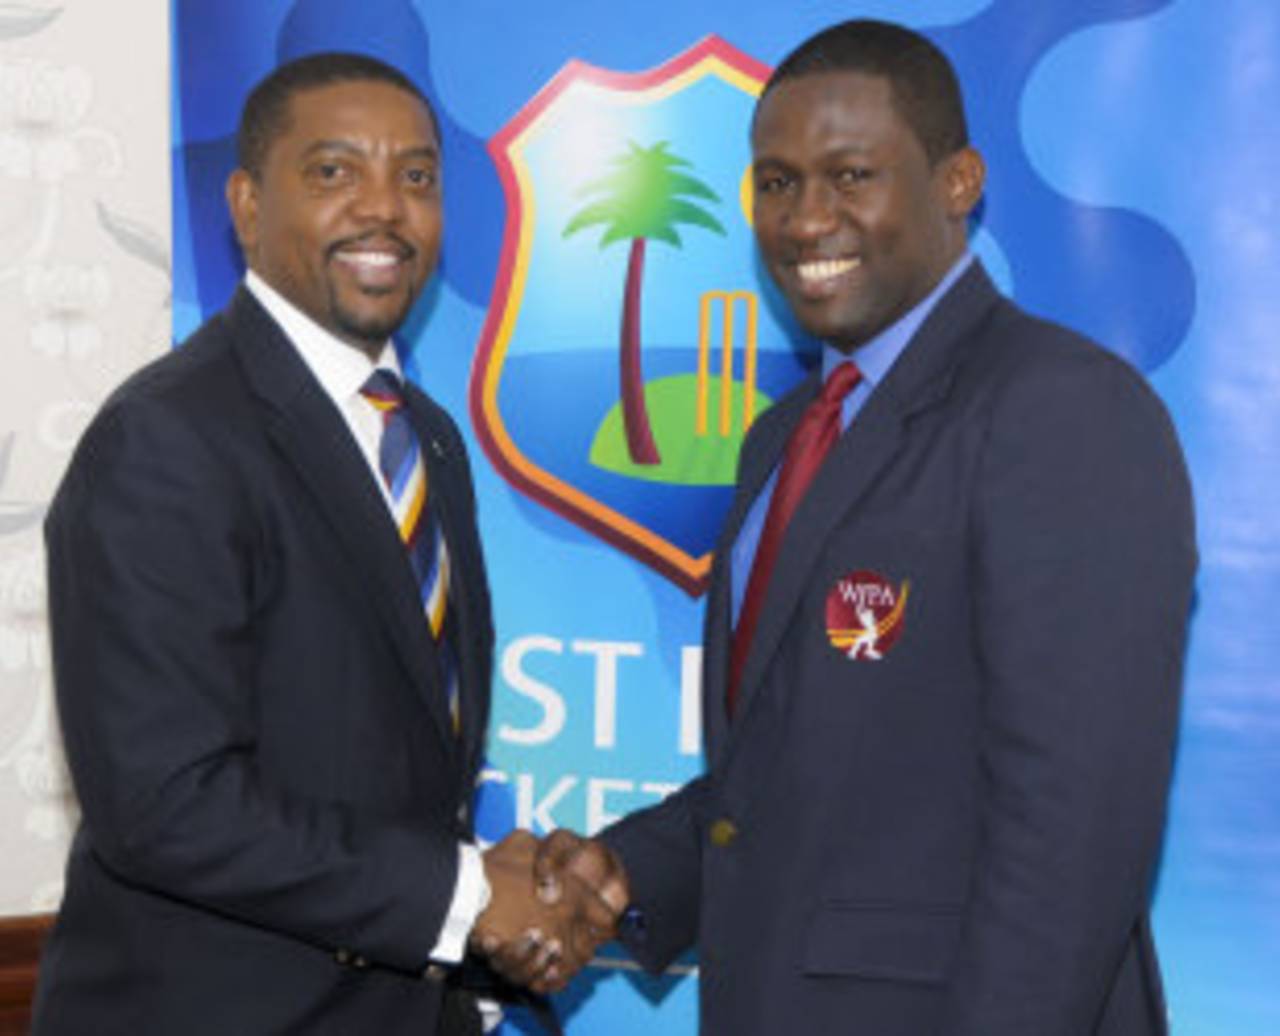 Dave Cameron, the WICB president, and Wavell Hinds, the WIPA president, at the agreement-signing ceremony, Bridgetown, September 18, 2014